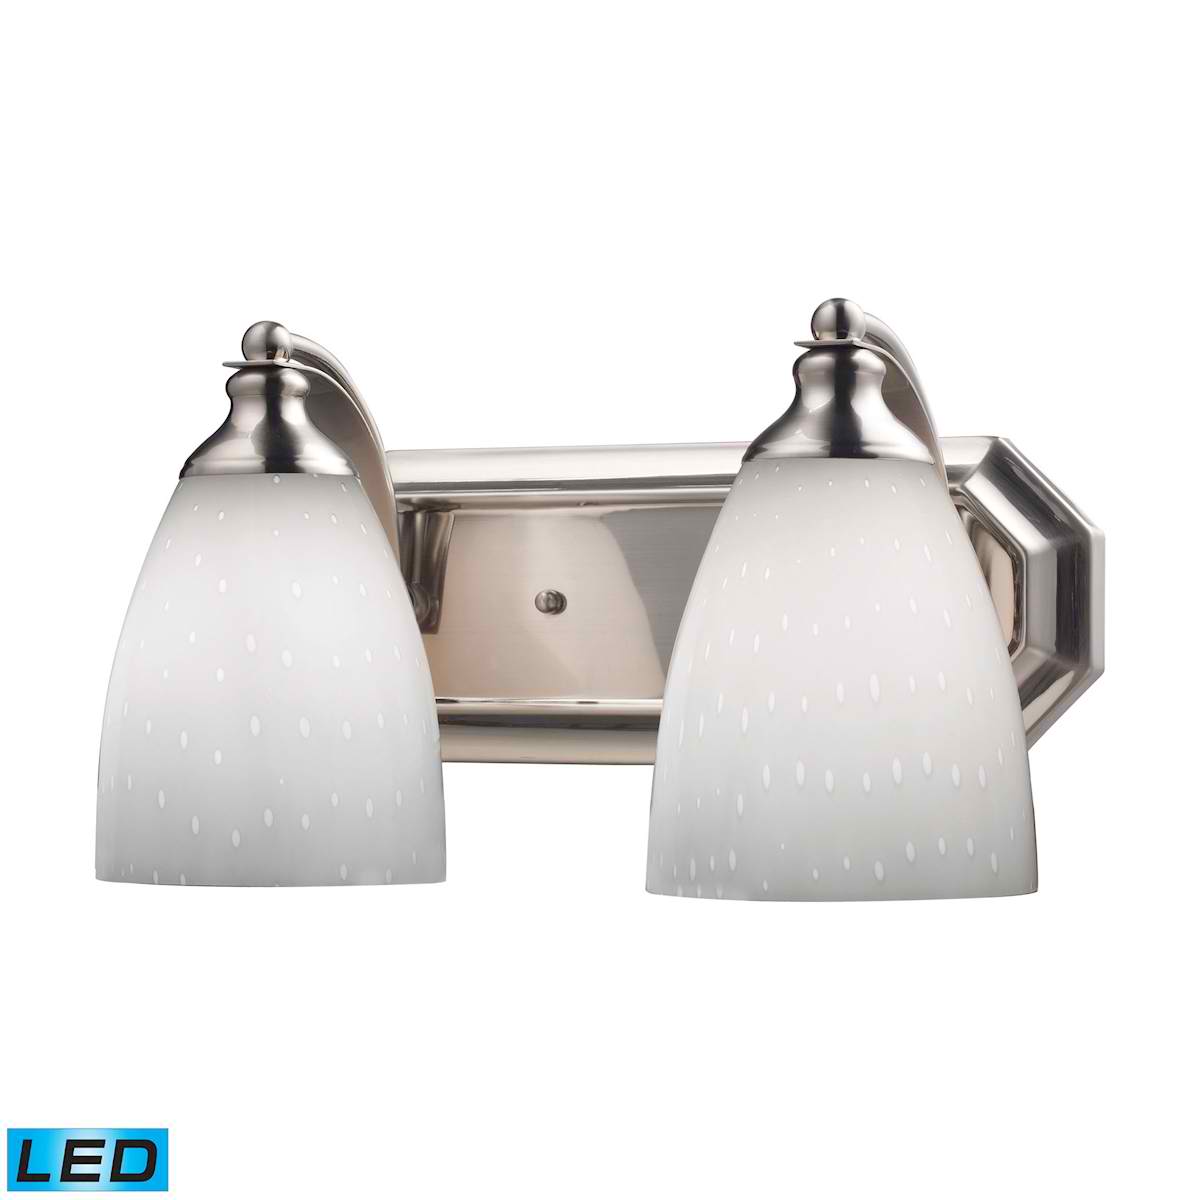 2 Light Vanity in Satin Nickel and Simply White Glass - LED, 800 Lumens (1600 Lumens Total) with Full Scale